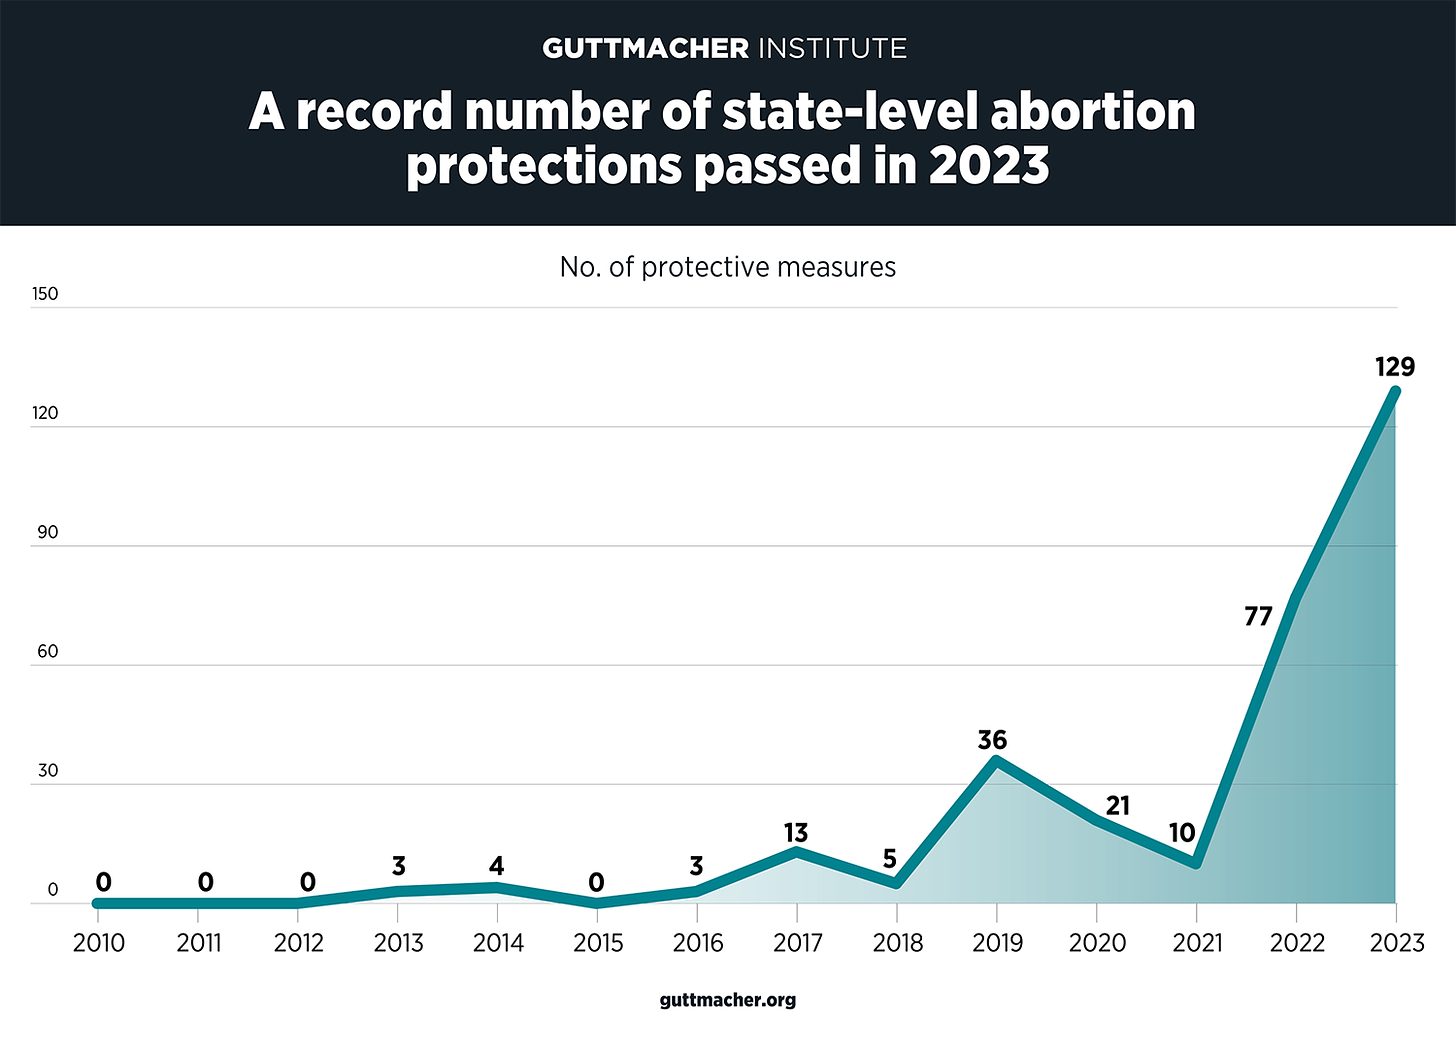 A record number of state-level abortion protections passed in 2023.